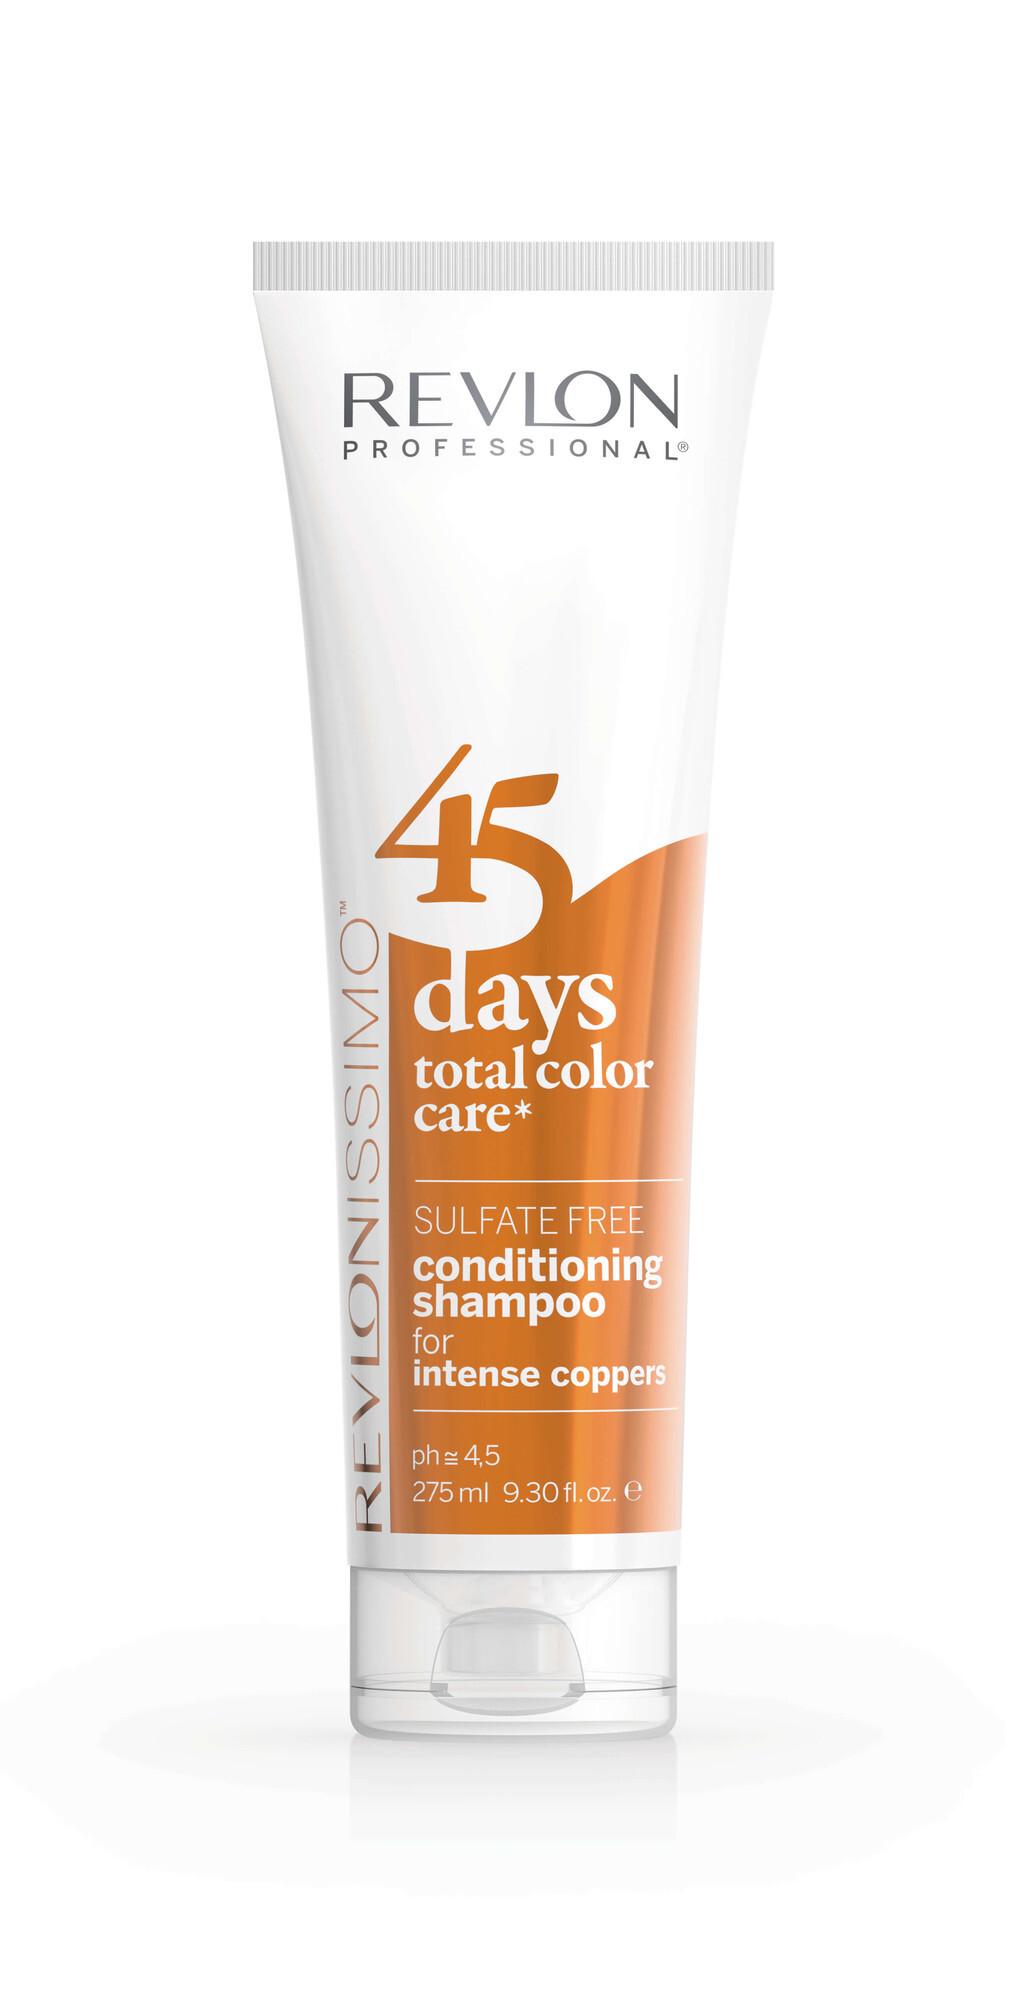 Revlon 45 Days 2 in 1 Shampoo Intense Coppers